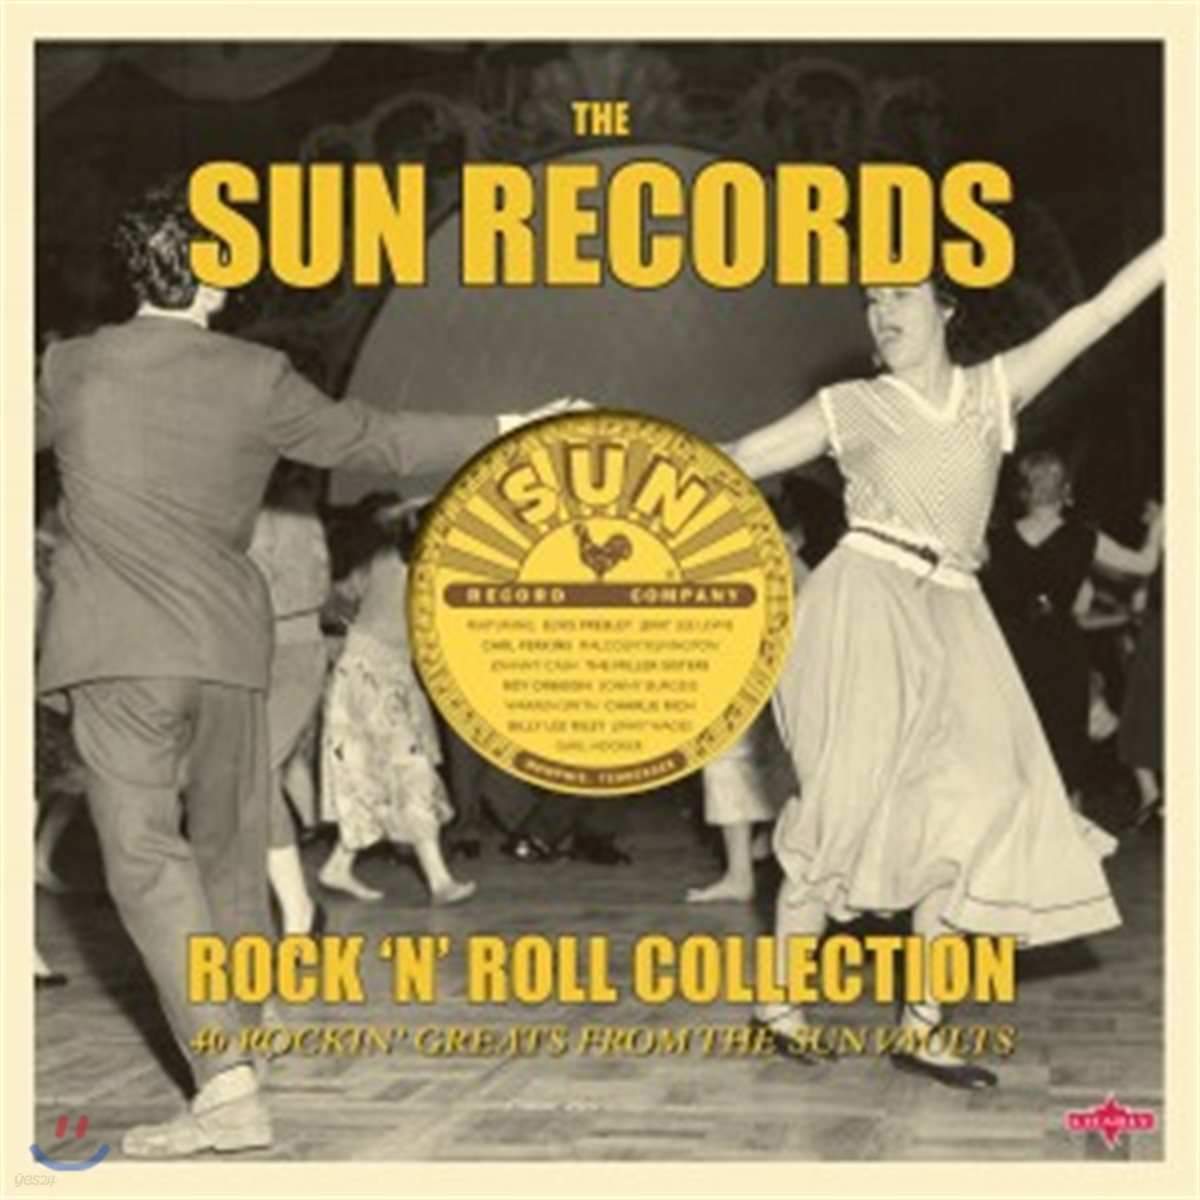 Sun Records (썬 레코드) - Rock `N` Roll Collection [2 LP]